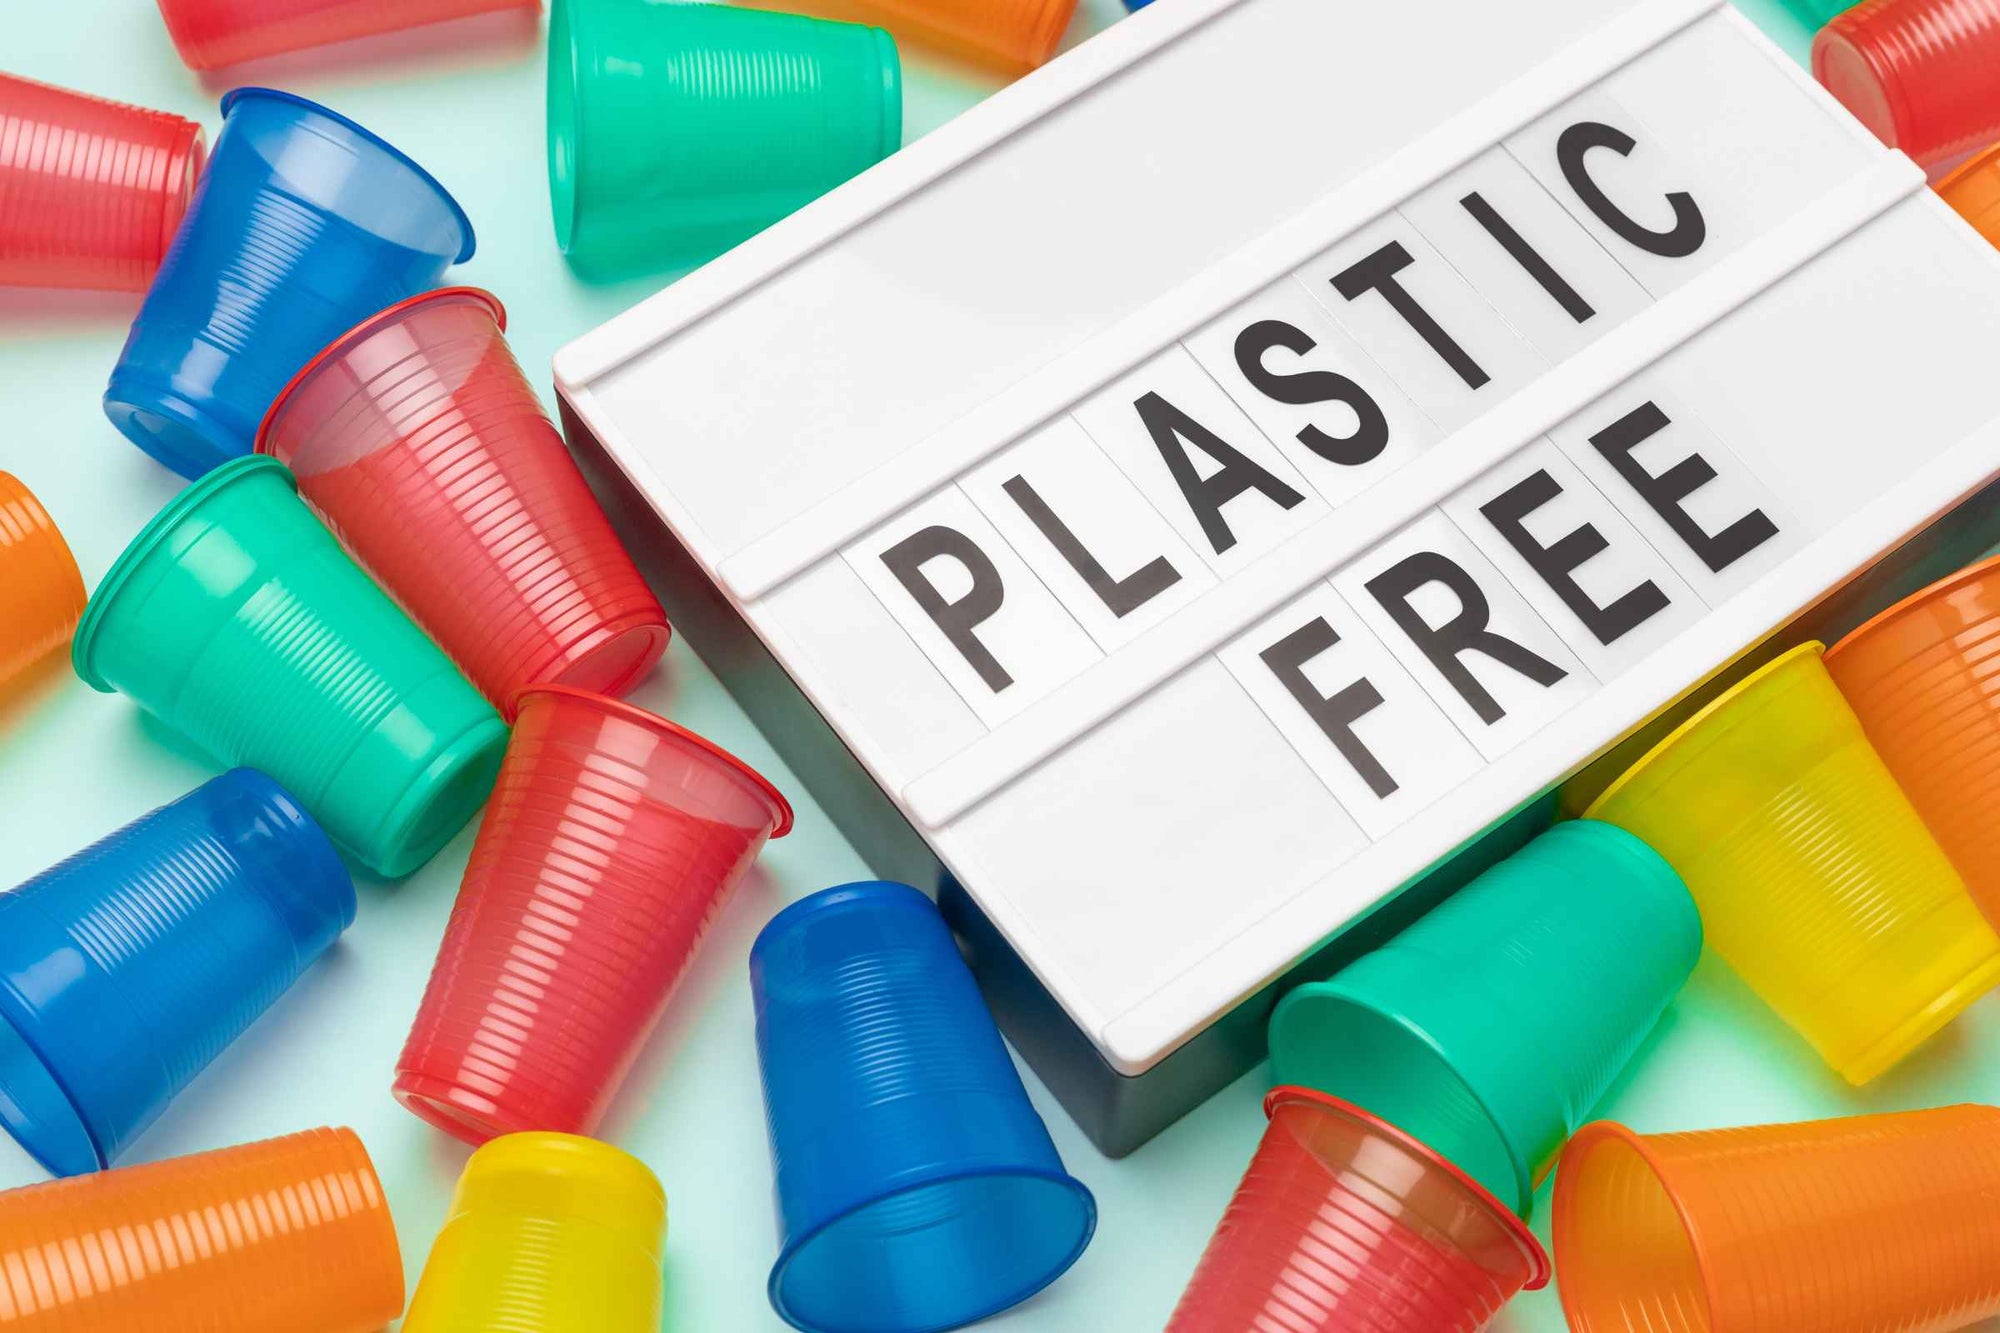 10 Simple Plastic-Free Swaps to help you Take Action this World Environment Day